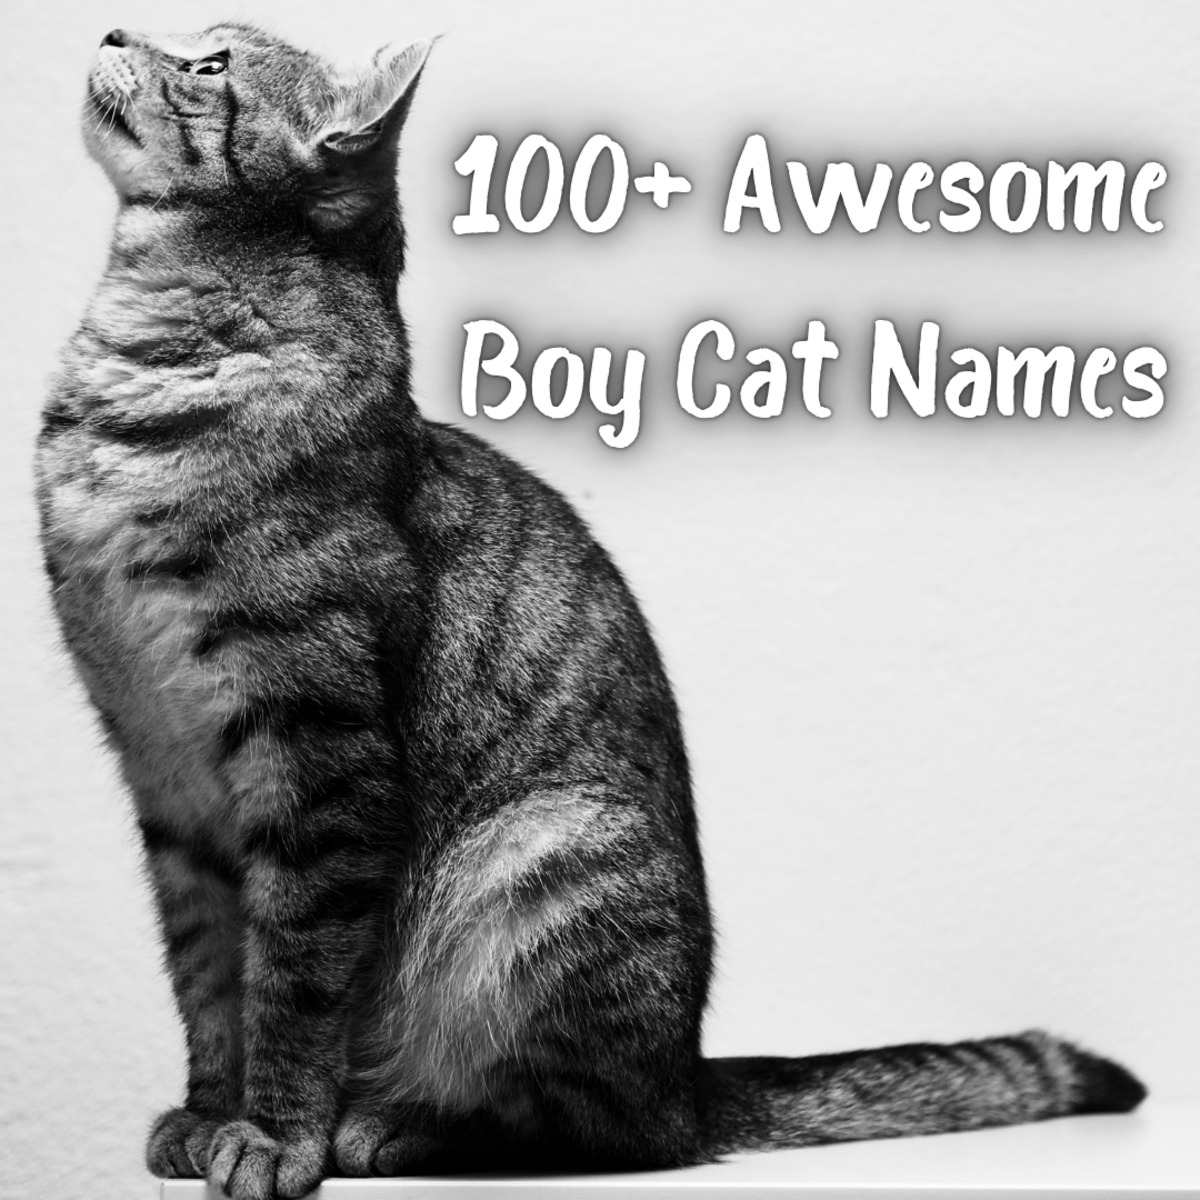 Read on to find over 100 great boy cat names for your new feline friend, plus advice on the naming process.